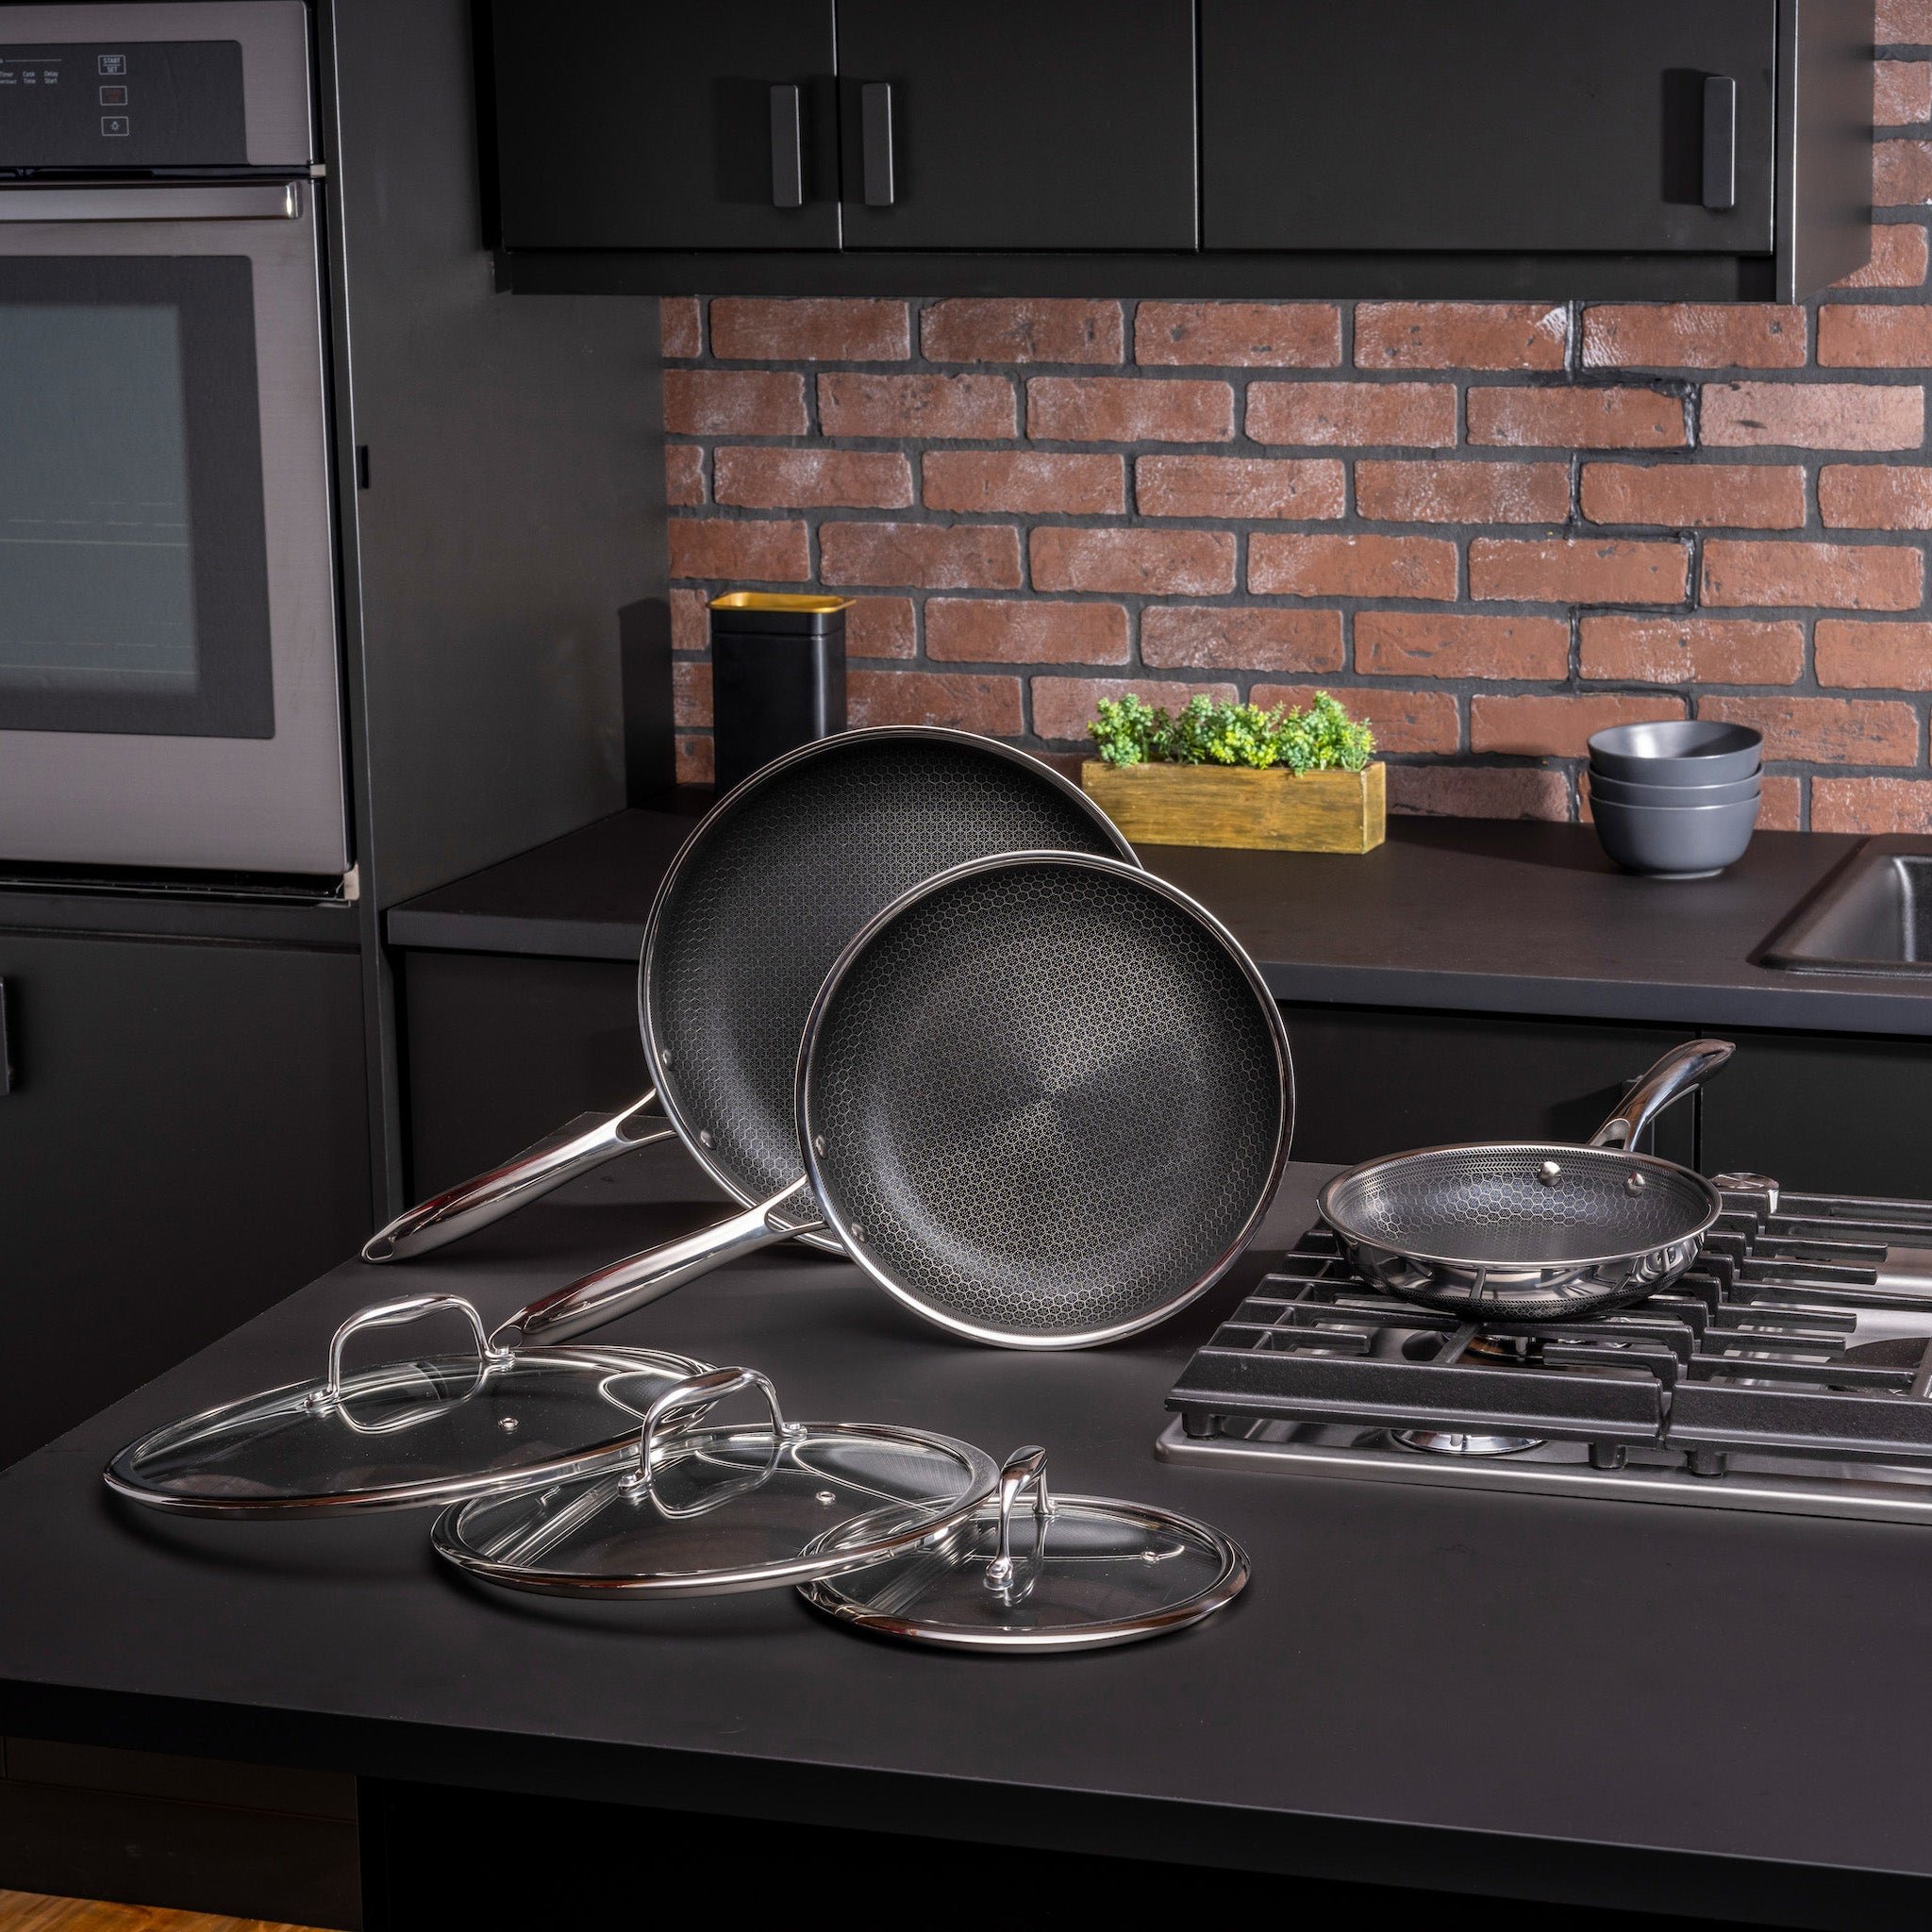 Stock up Your Kitchen With Some High Quality HexClad Cookware